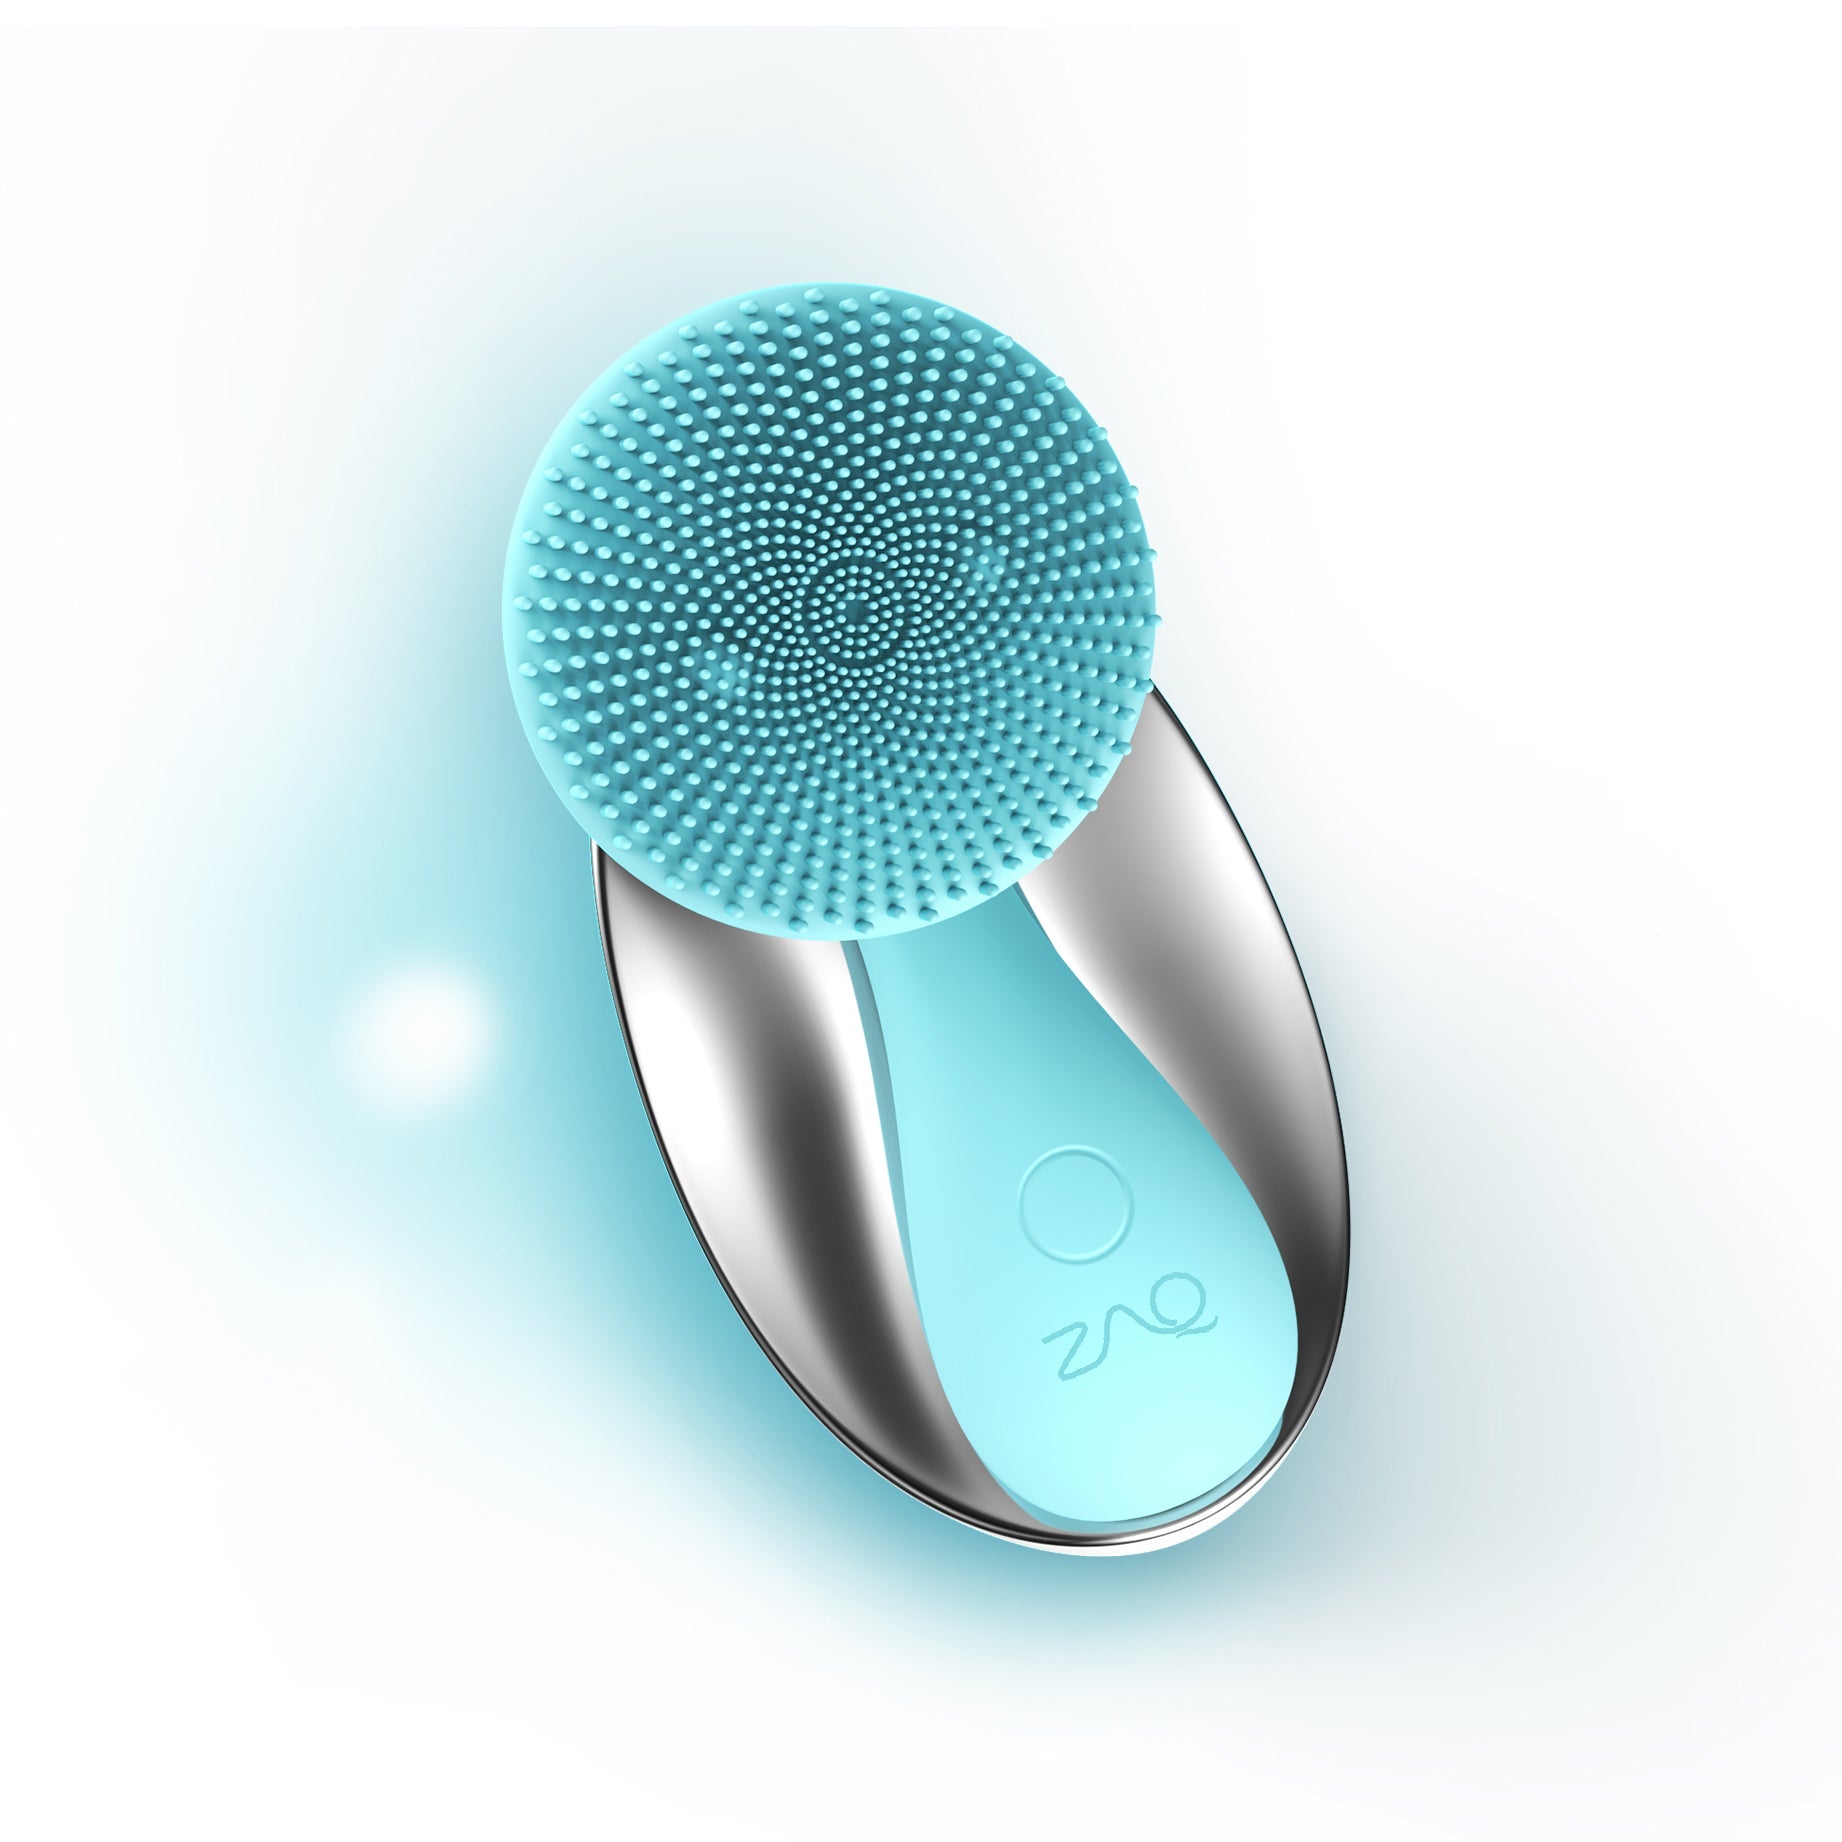 Wireless Ultrasonic Silicone Electric Facial Cleansing Brush Cyan